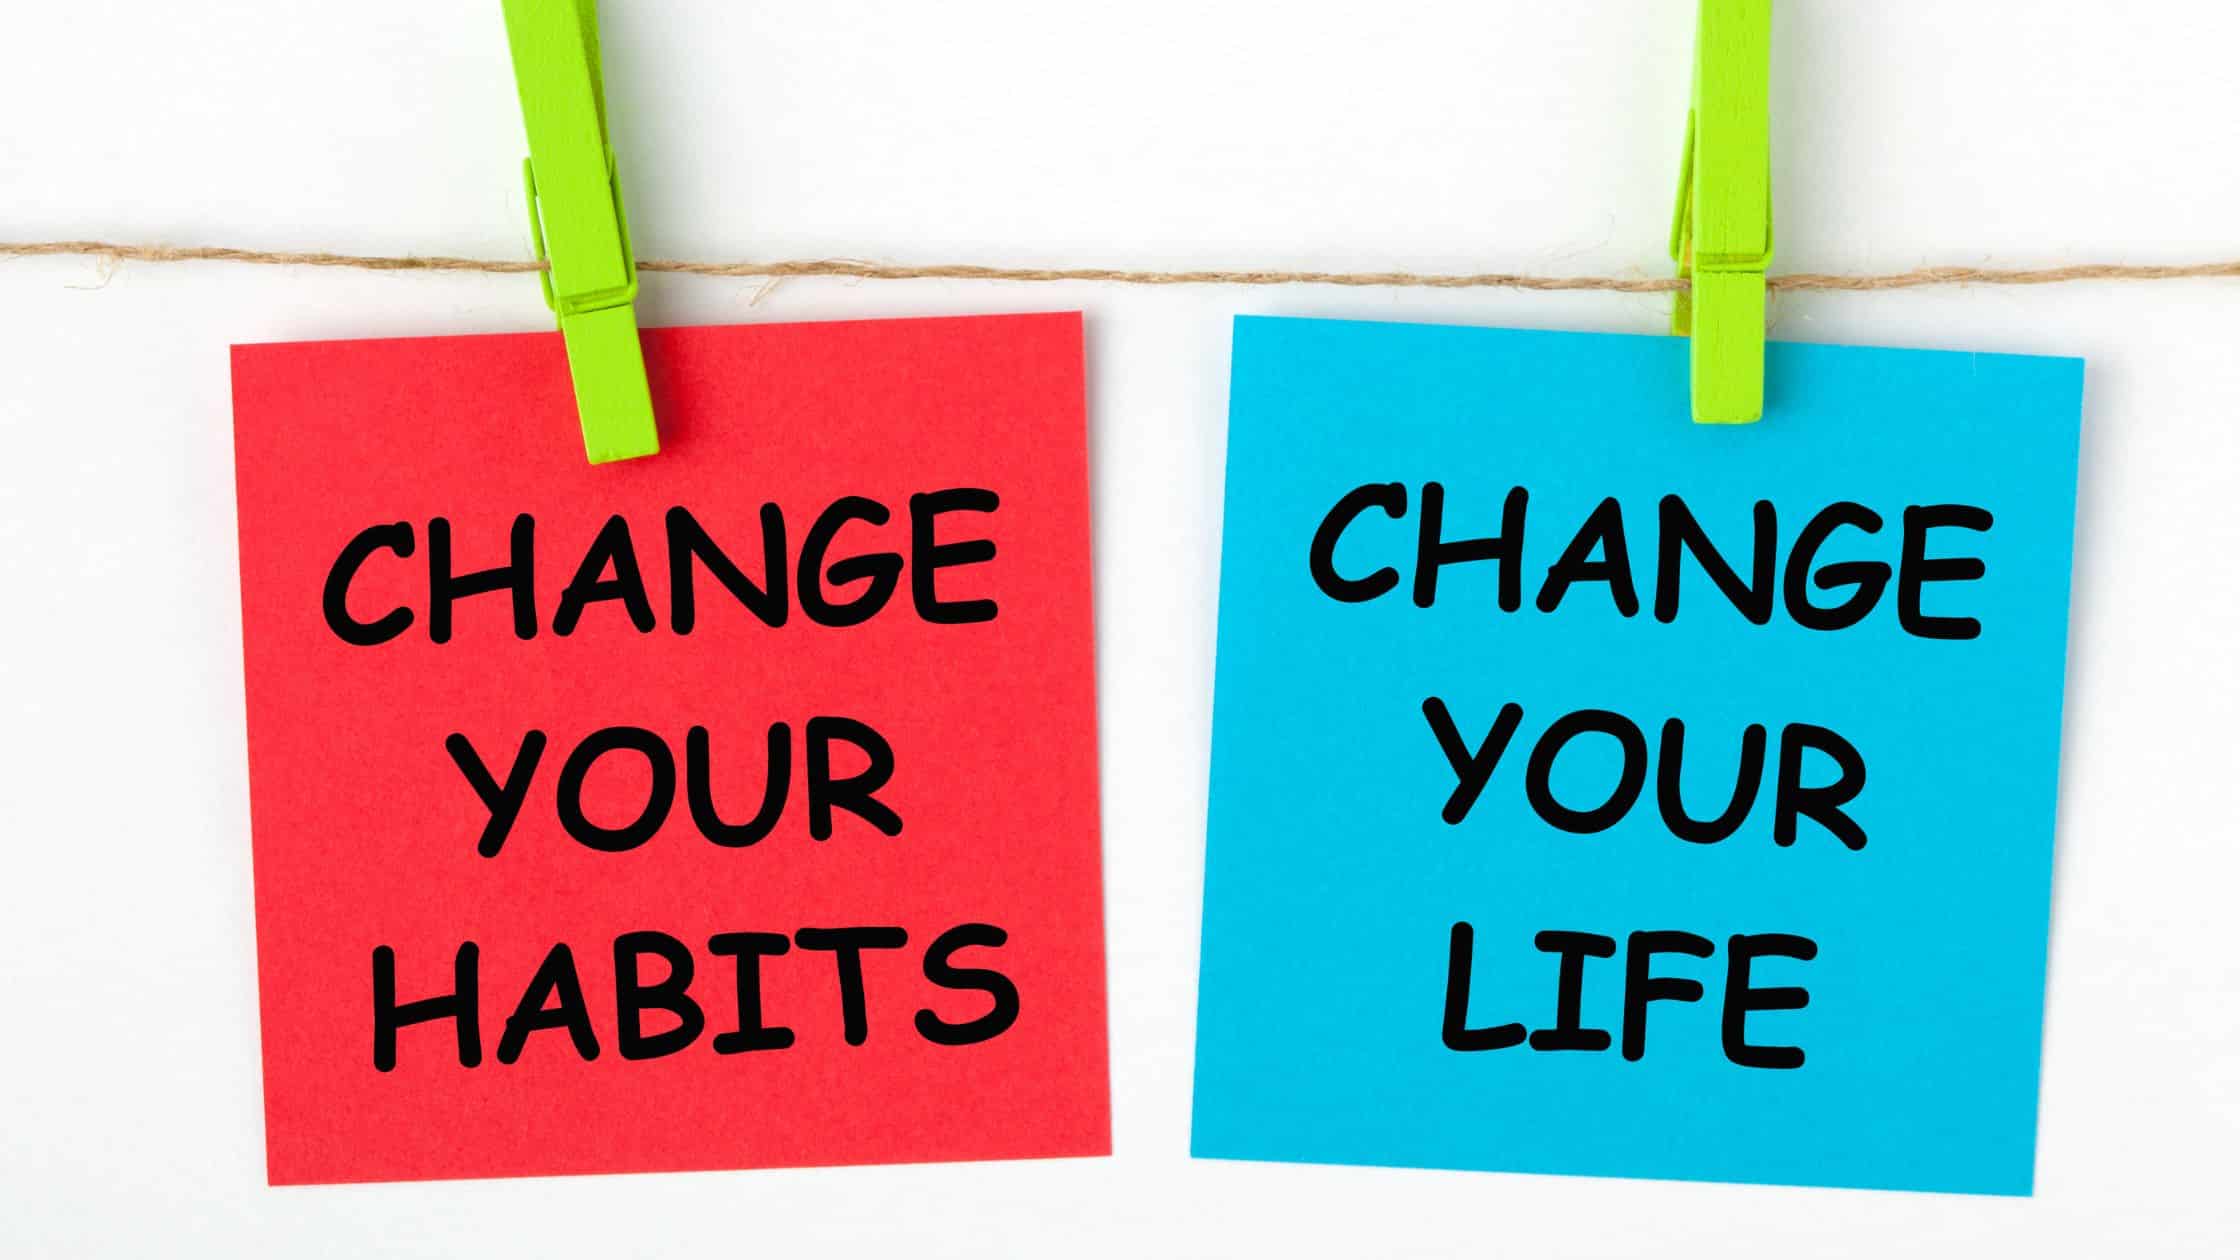 Two simple habits that can help increase your productivity and focus.